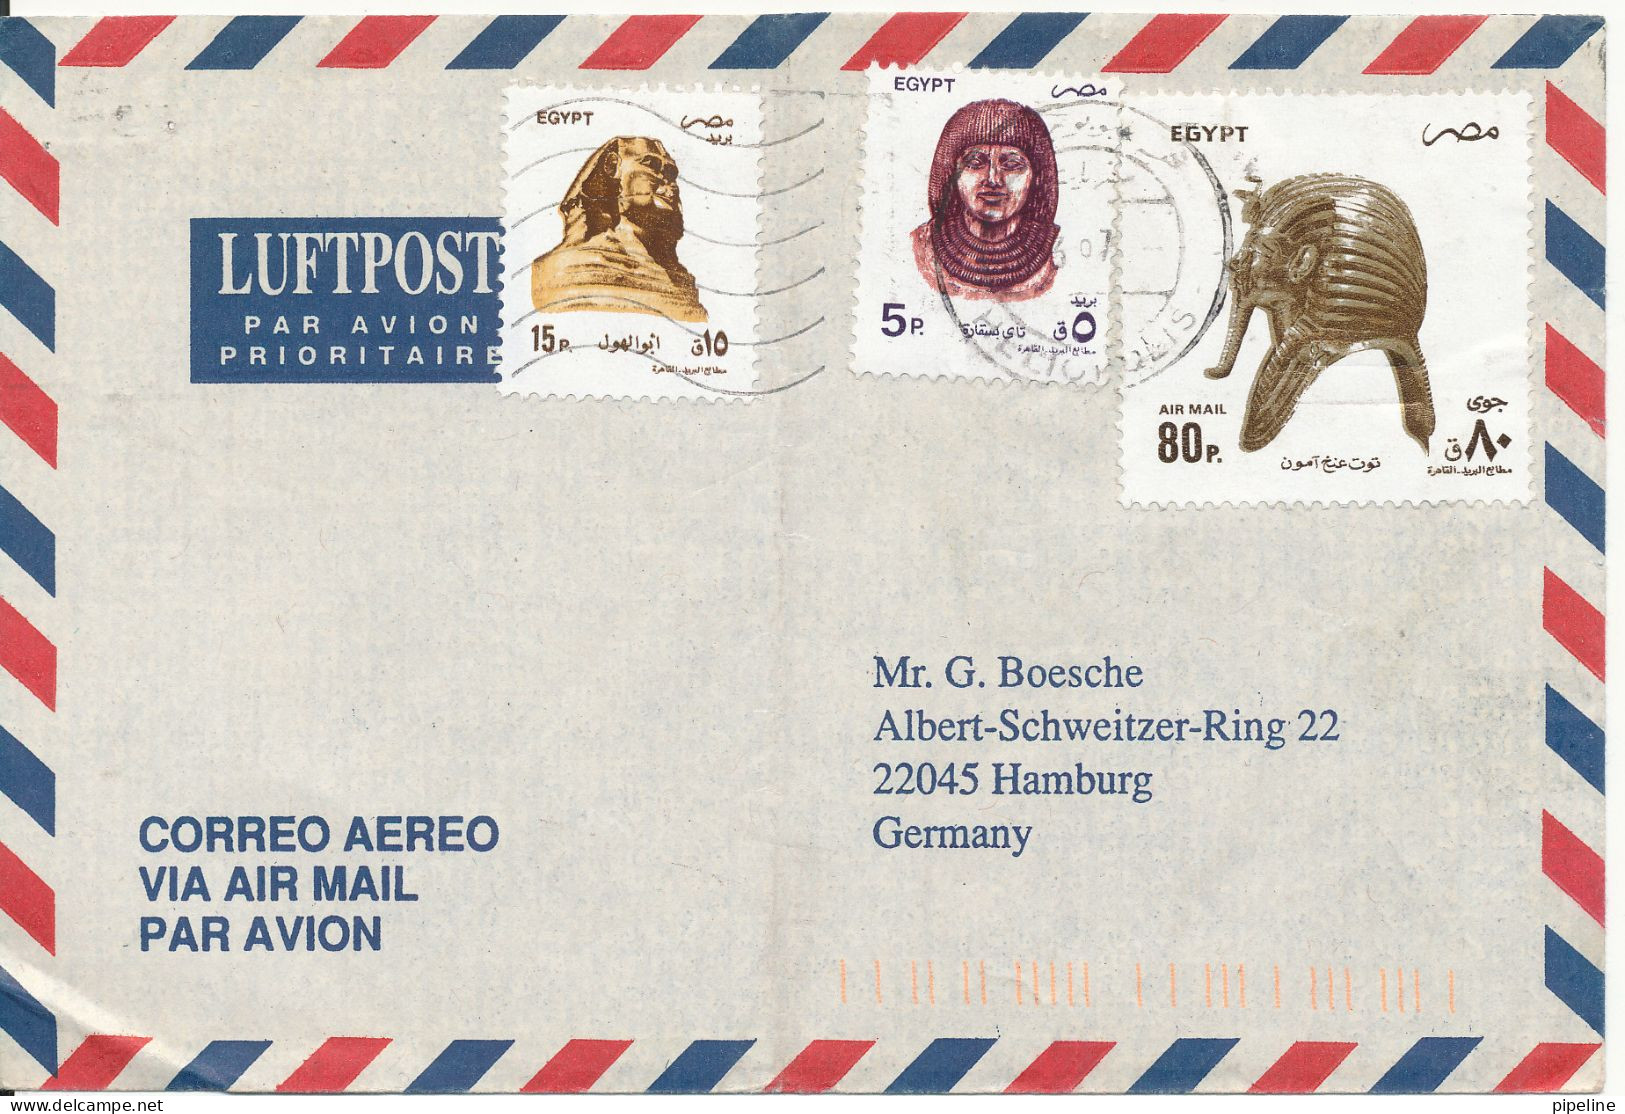 Egypt Air Mail Cover Sent To Germany 1997 - Luftpost